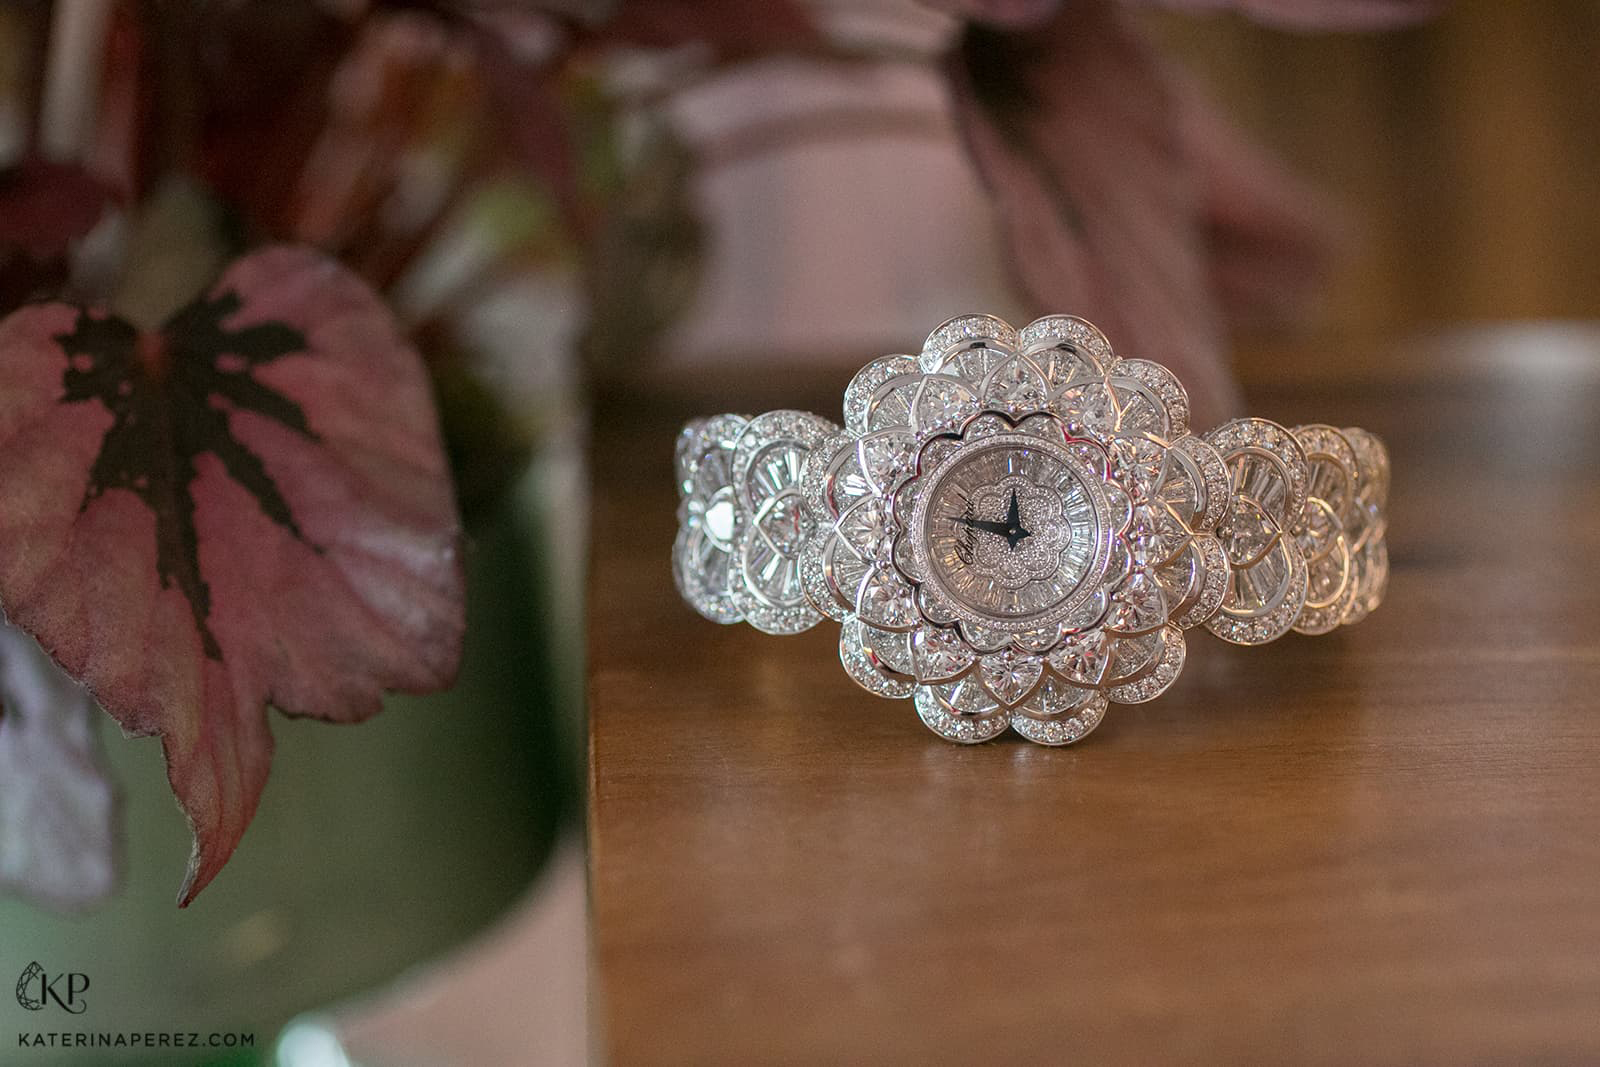 Chopard ‘Waterlily’ watch with 43ct diamonds in white gold